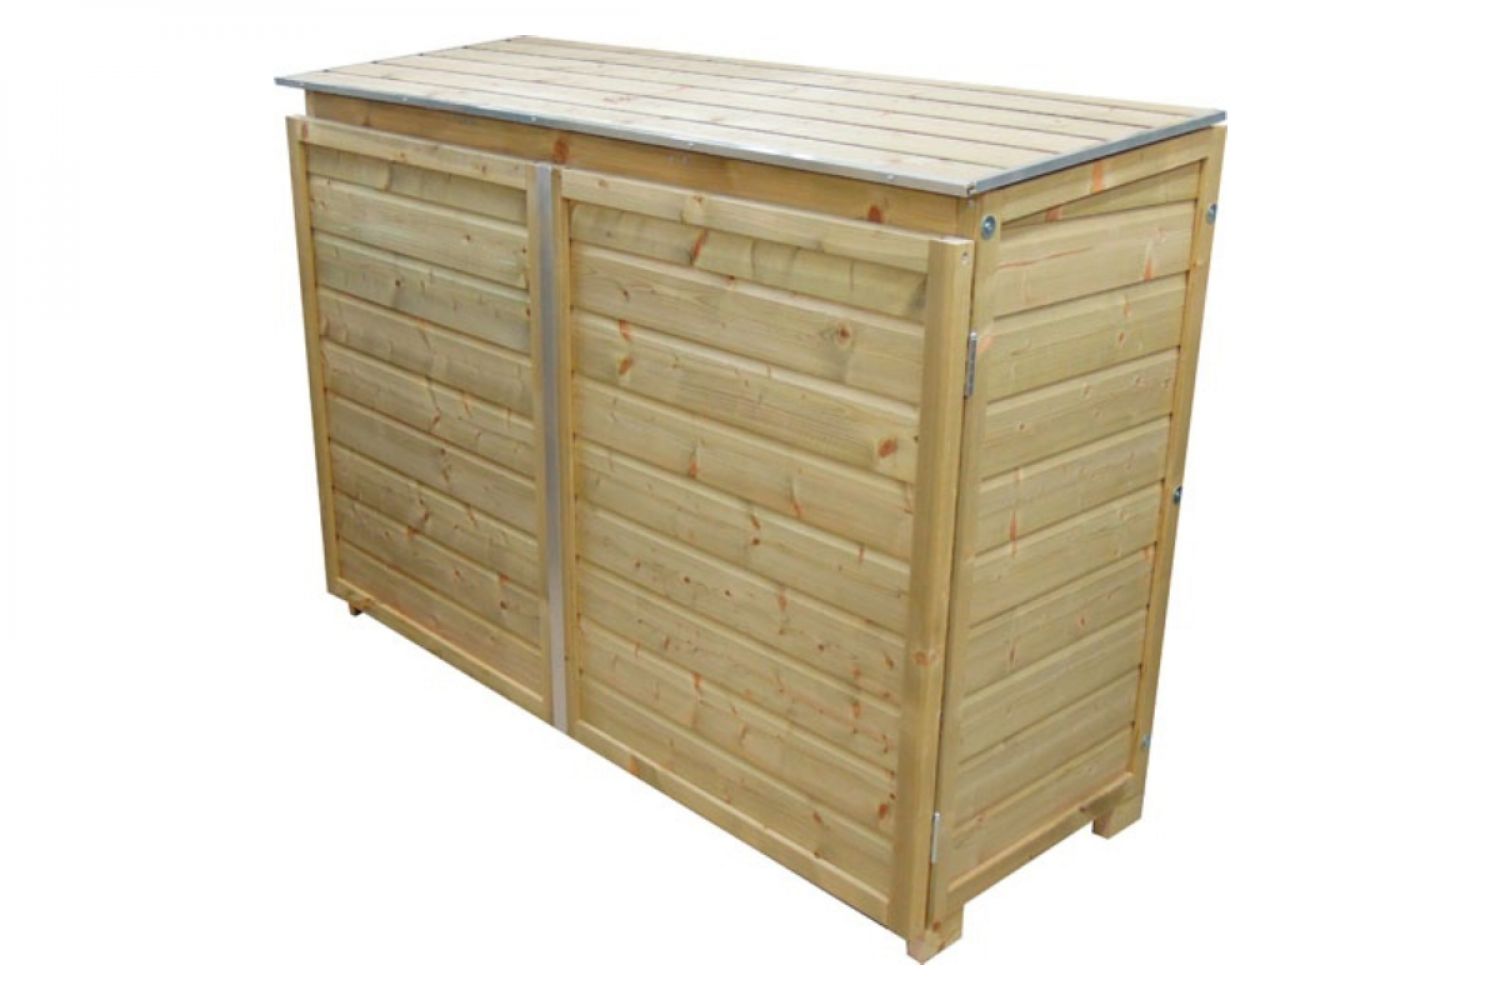 LK140TRIO-R Containerberging | 176x65x125 cm - voor 3 containers!